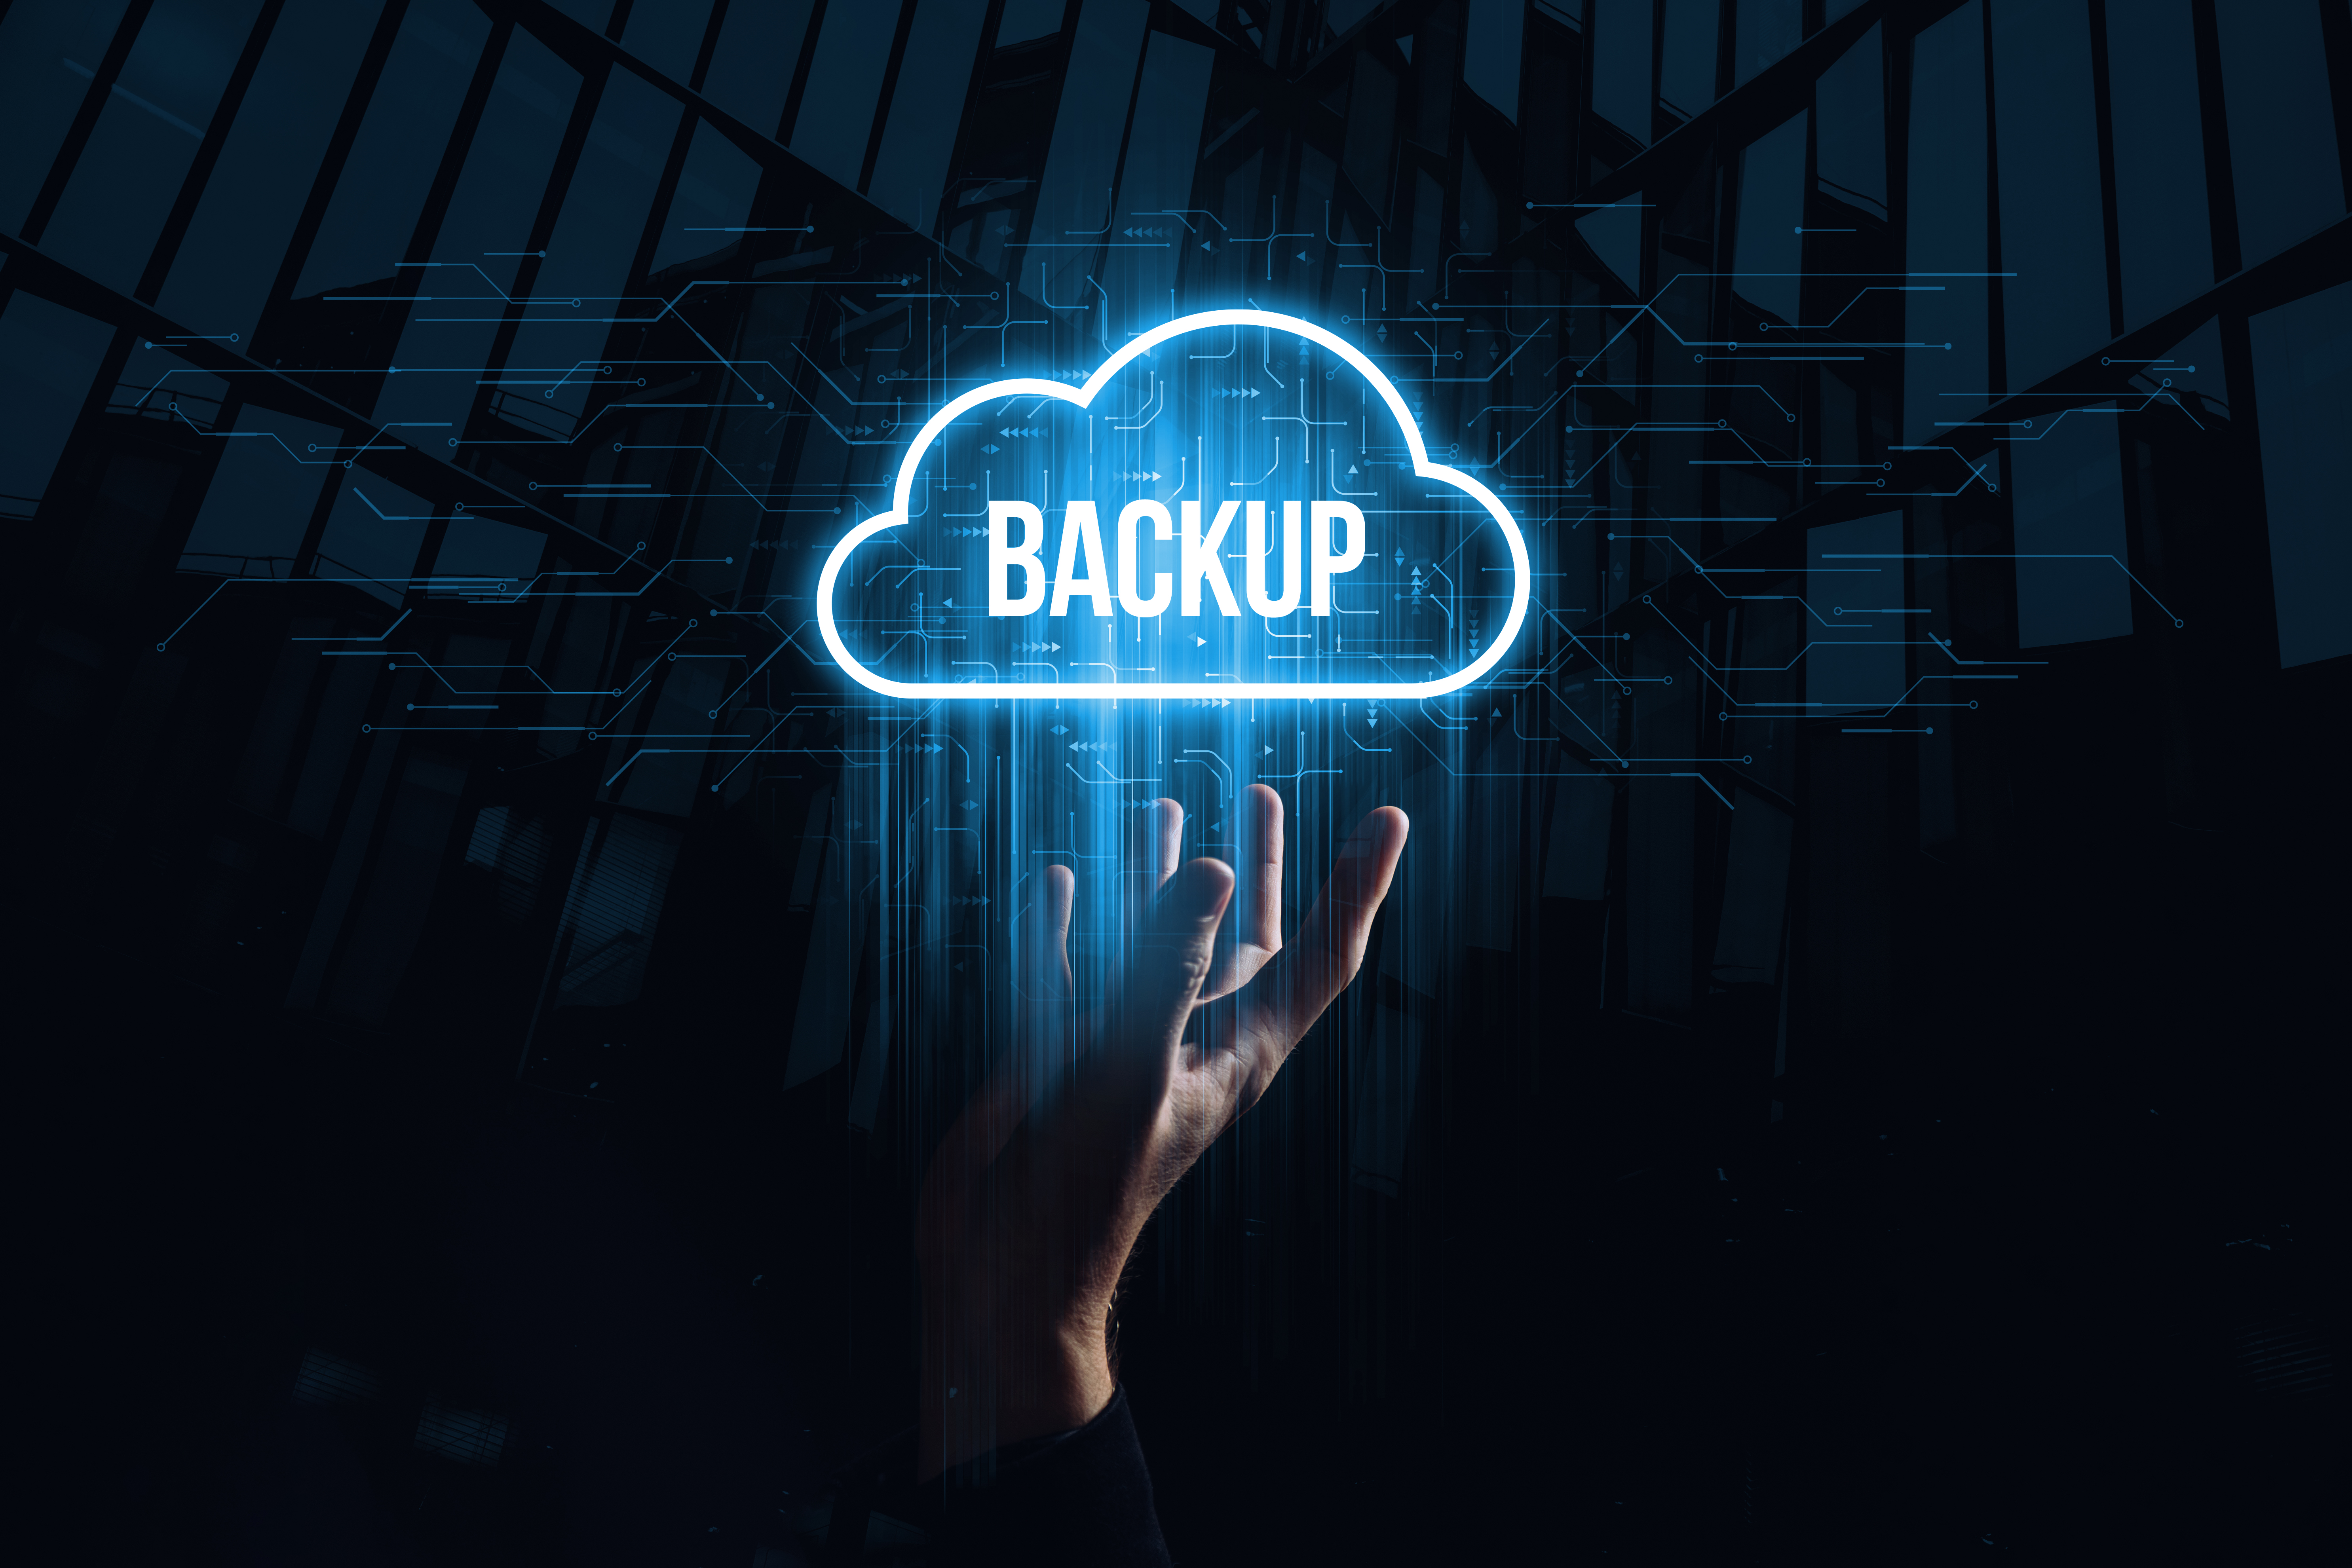 Data backup for data recovery to original or new location. Hologram in the form of a cloud over the hand